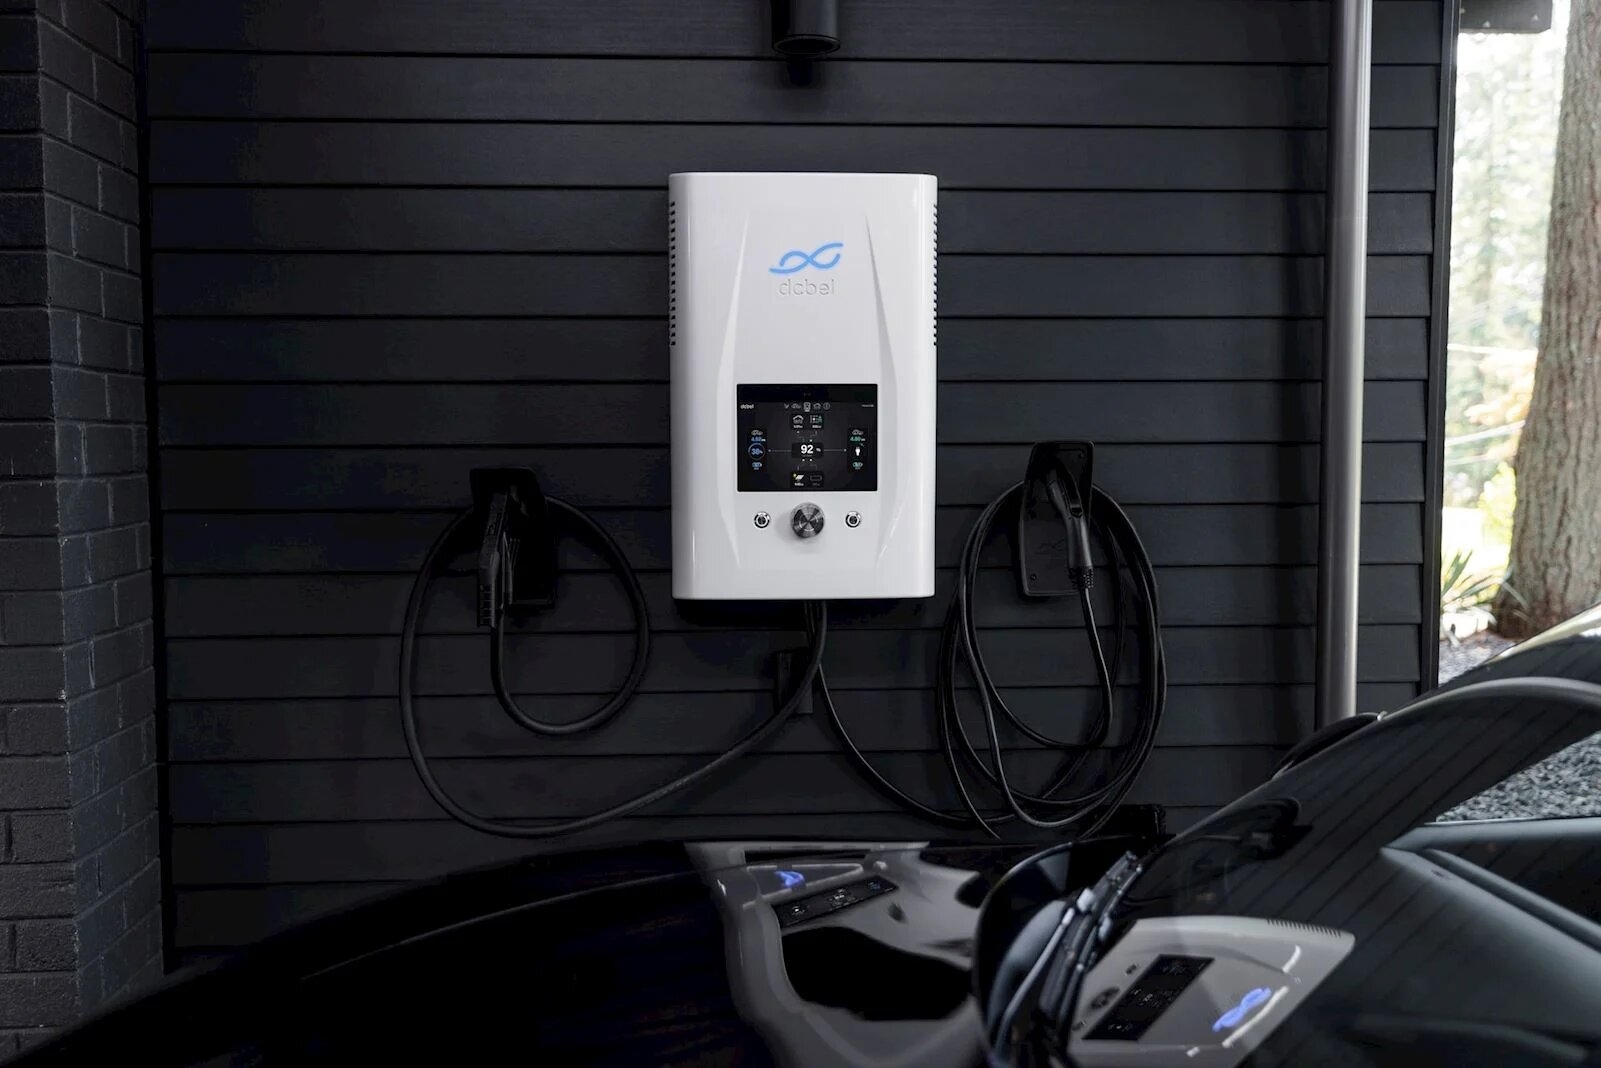 It costs less to install this EV charger